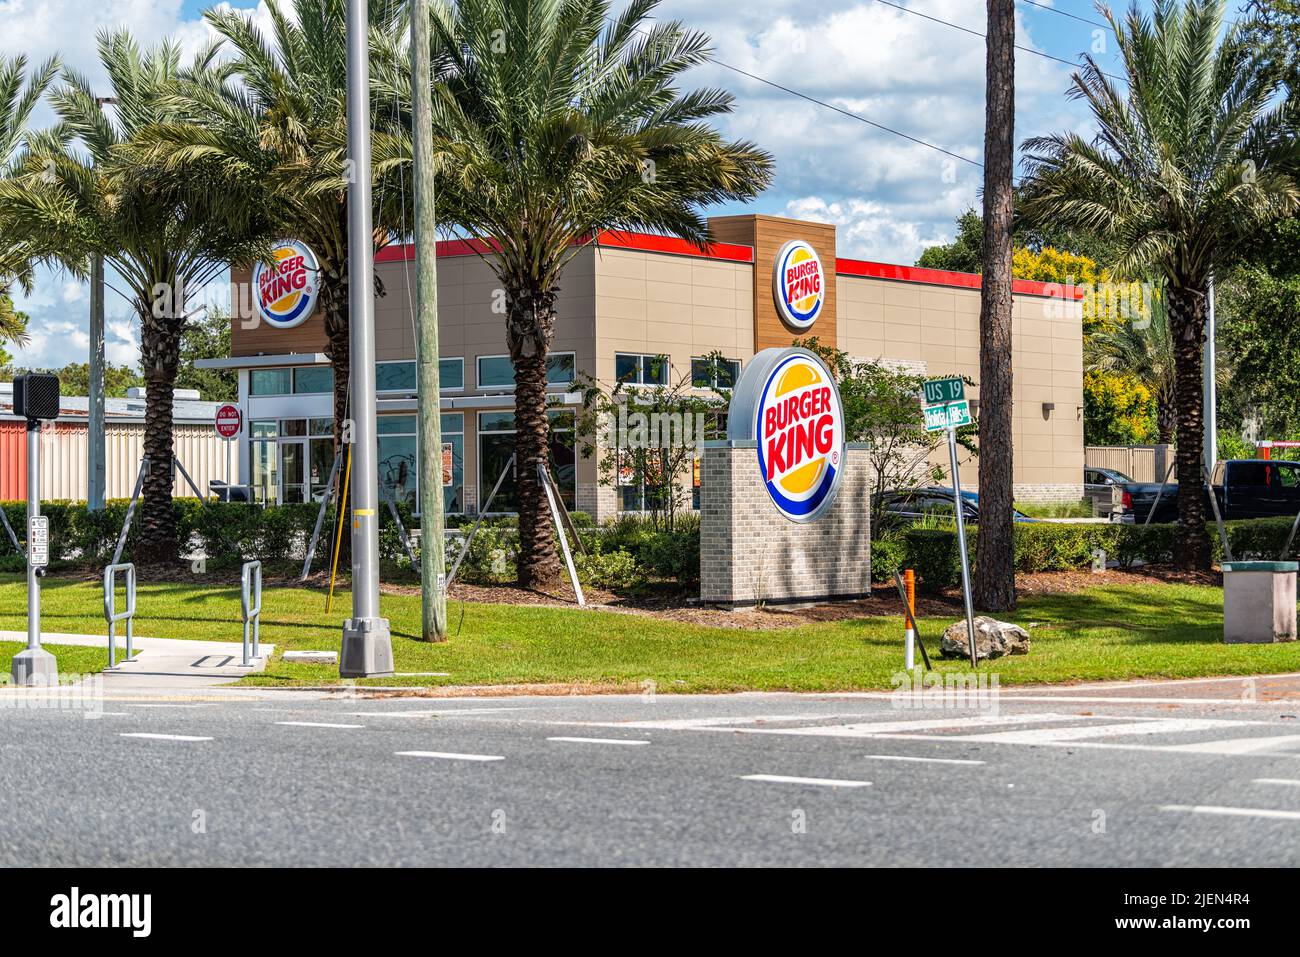 Port Richey, USA - October 4, 2021: Florida city on gulf coast with sign by building for Burger King fast food joint chain restaurant famously known f Stock Photo